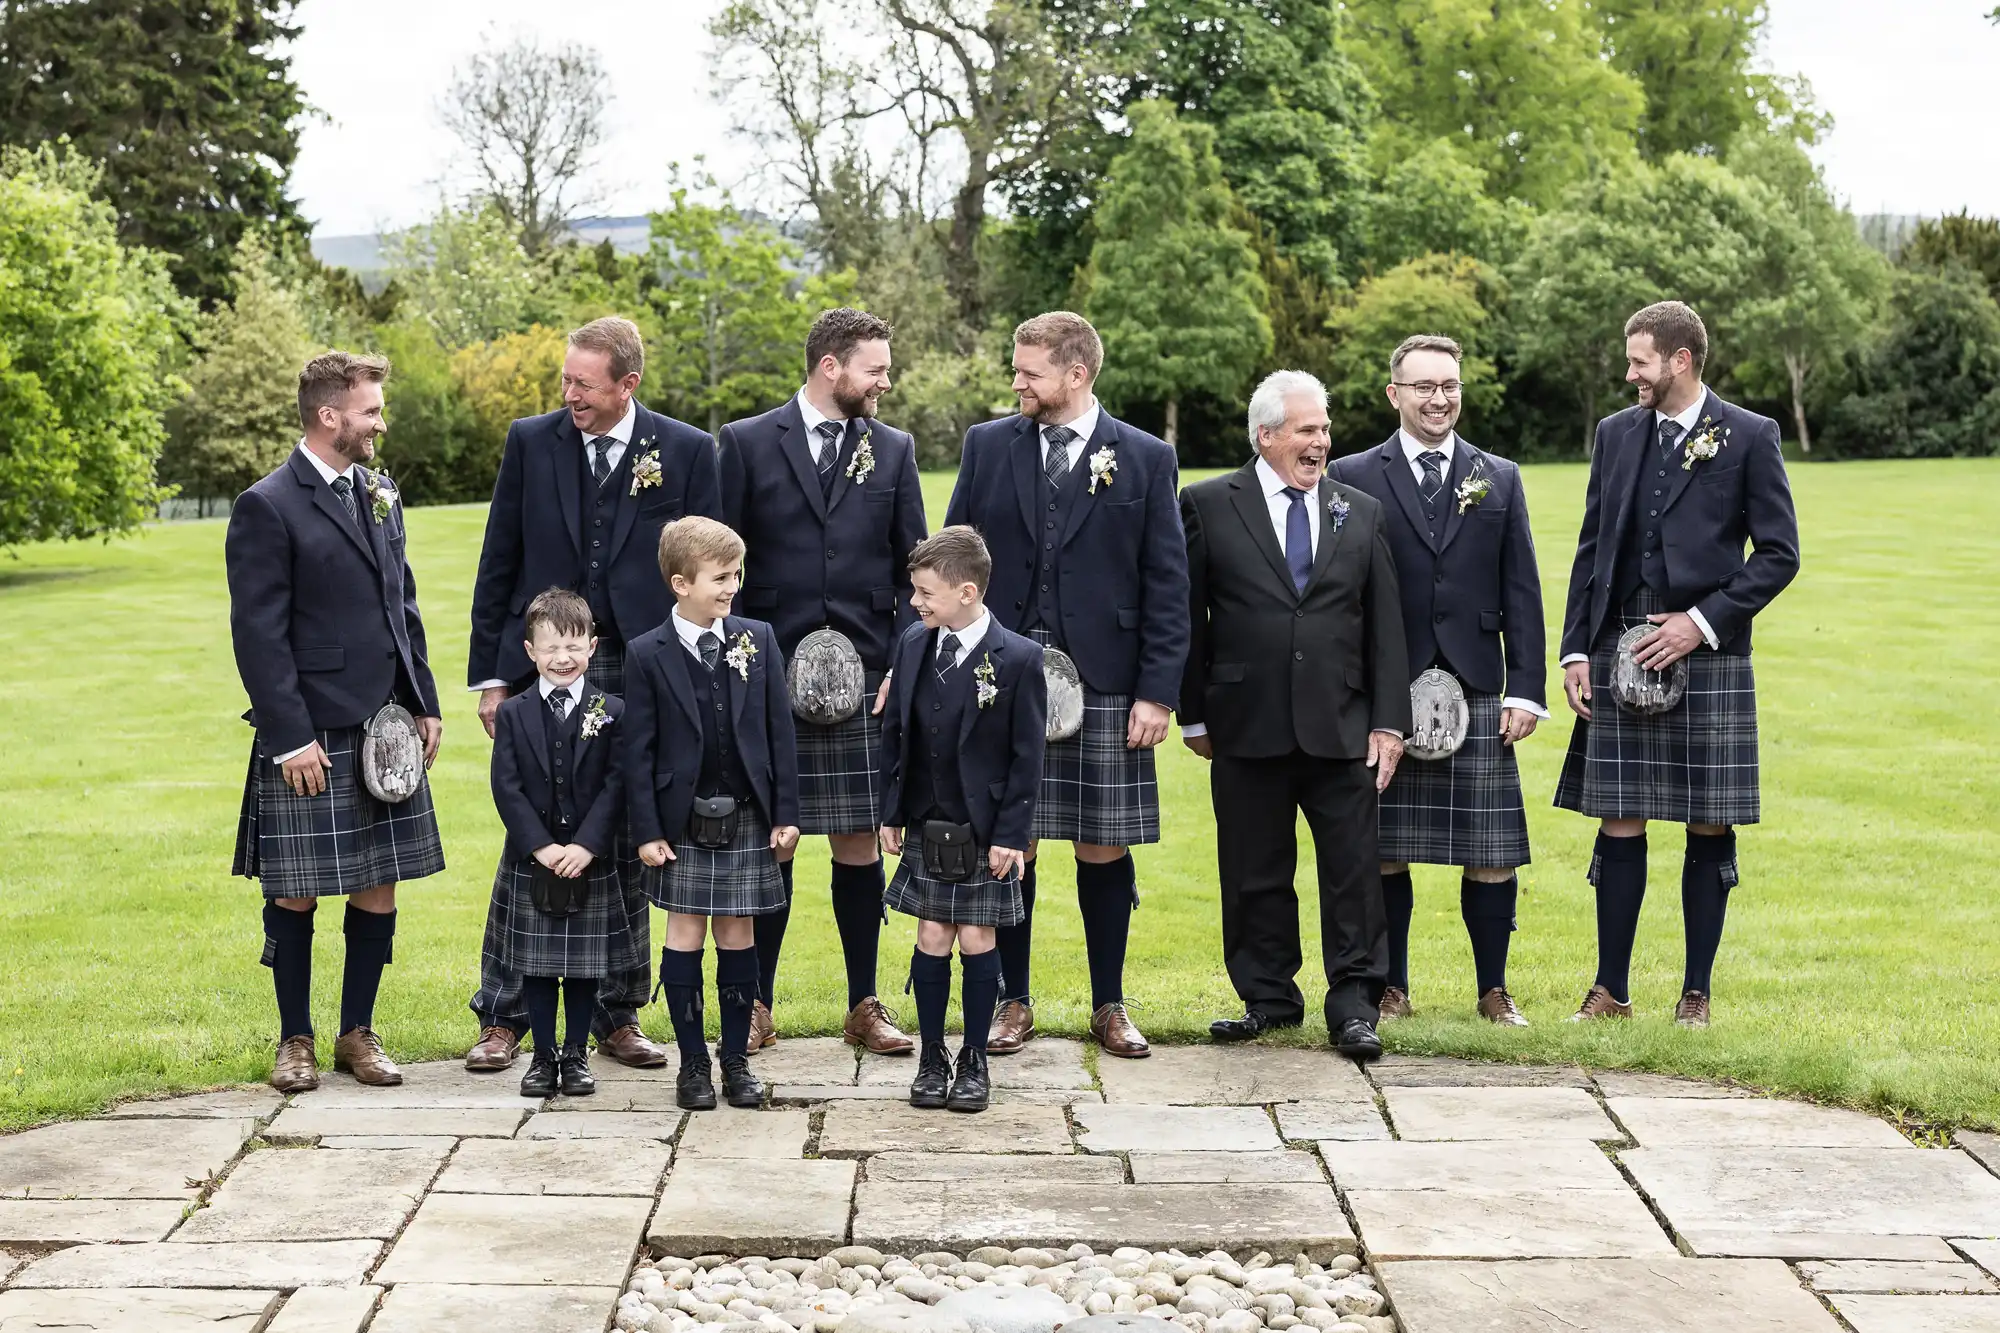 Group of men and boys in traditional Scottish attire with kilts, standing outdoors, smiling on a grassy background.